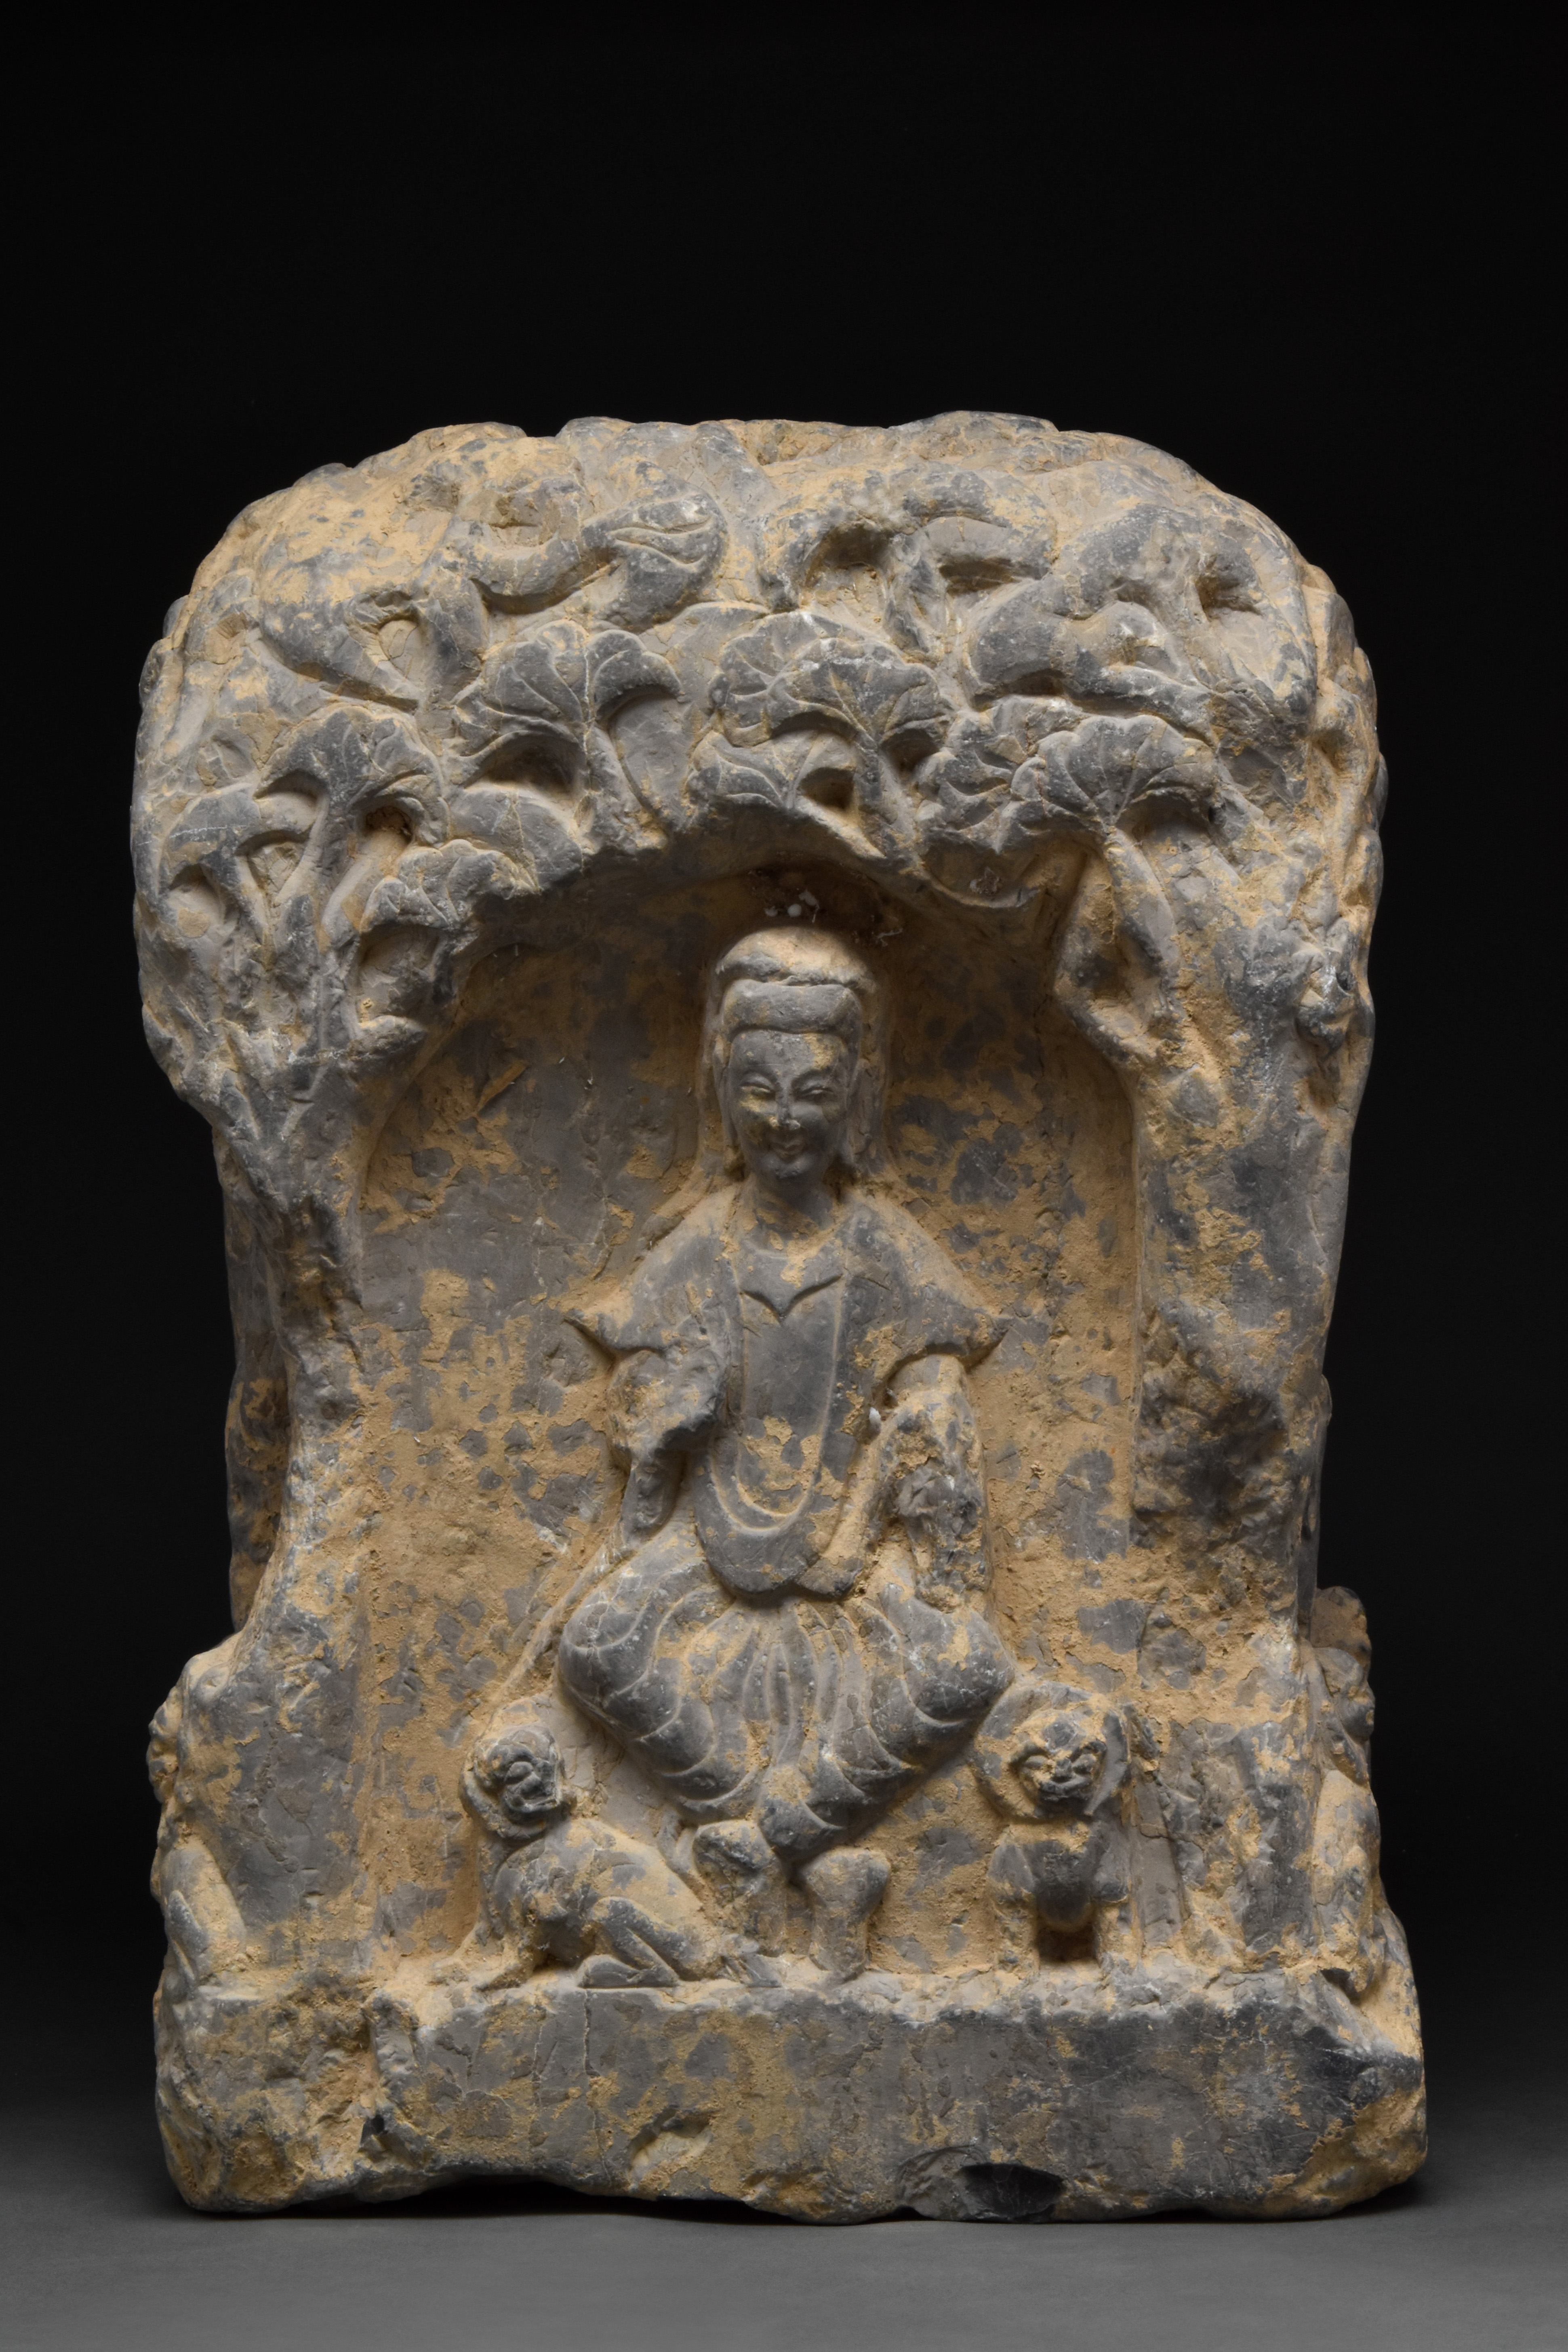 CHINESE SUI DYNASTY STONE STELE